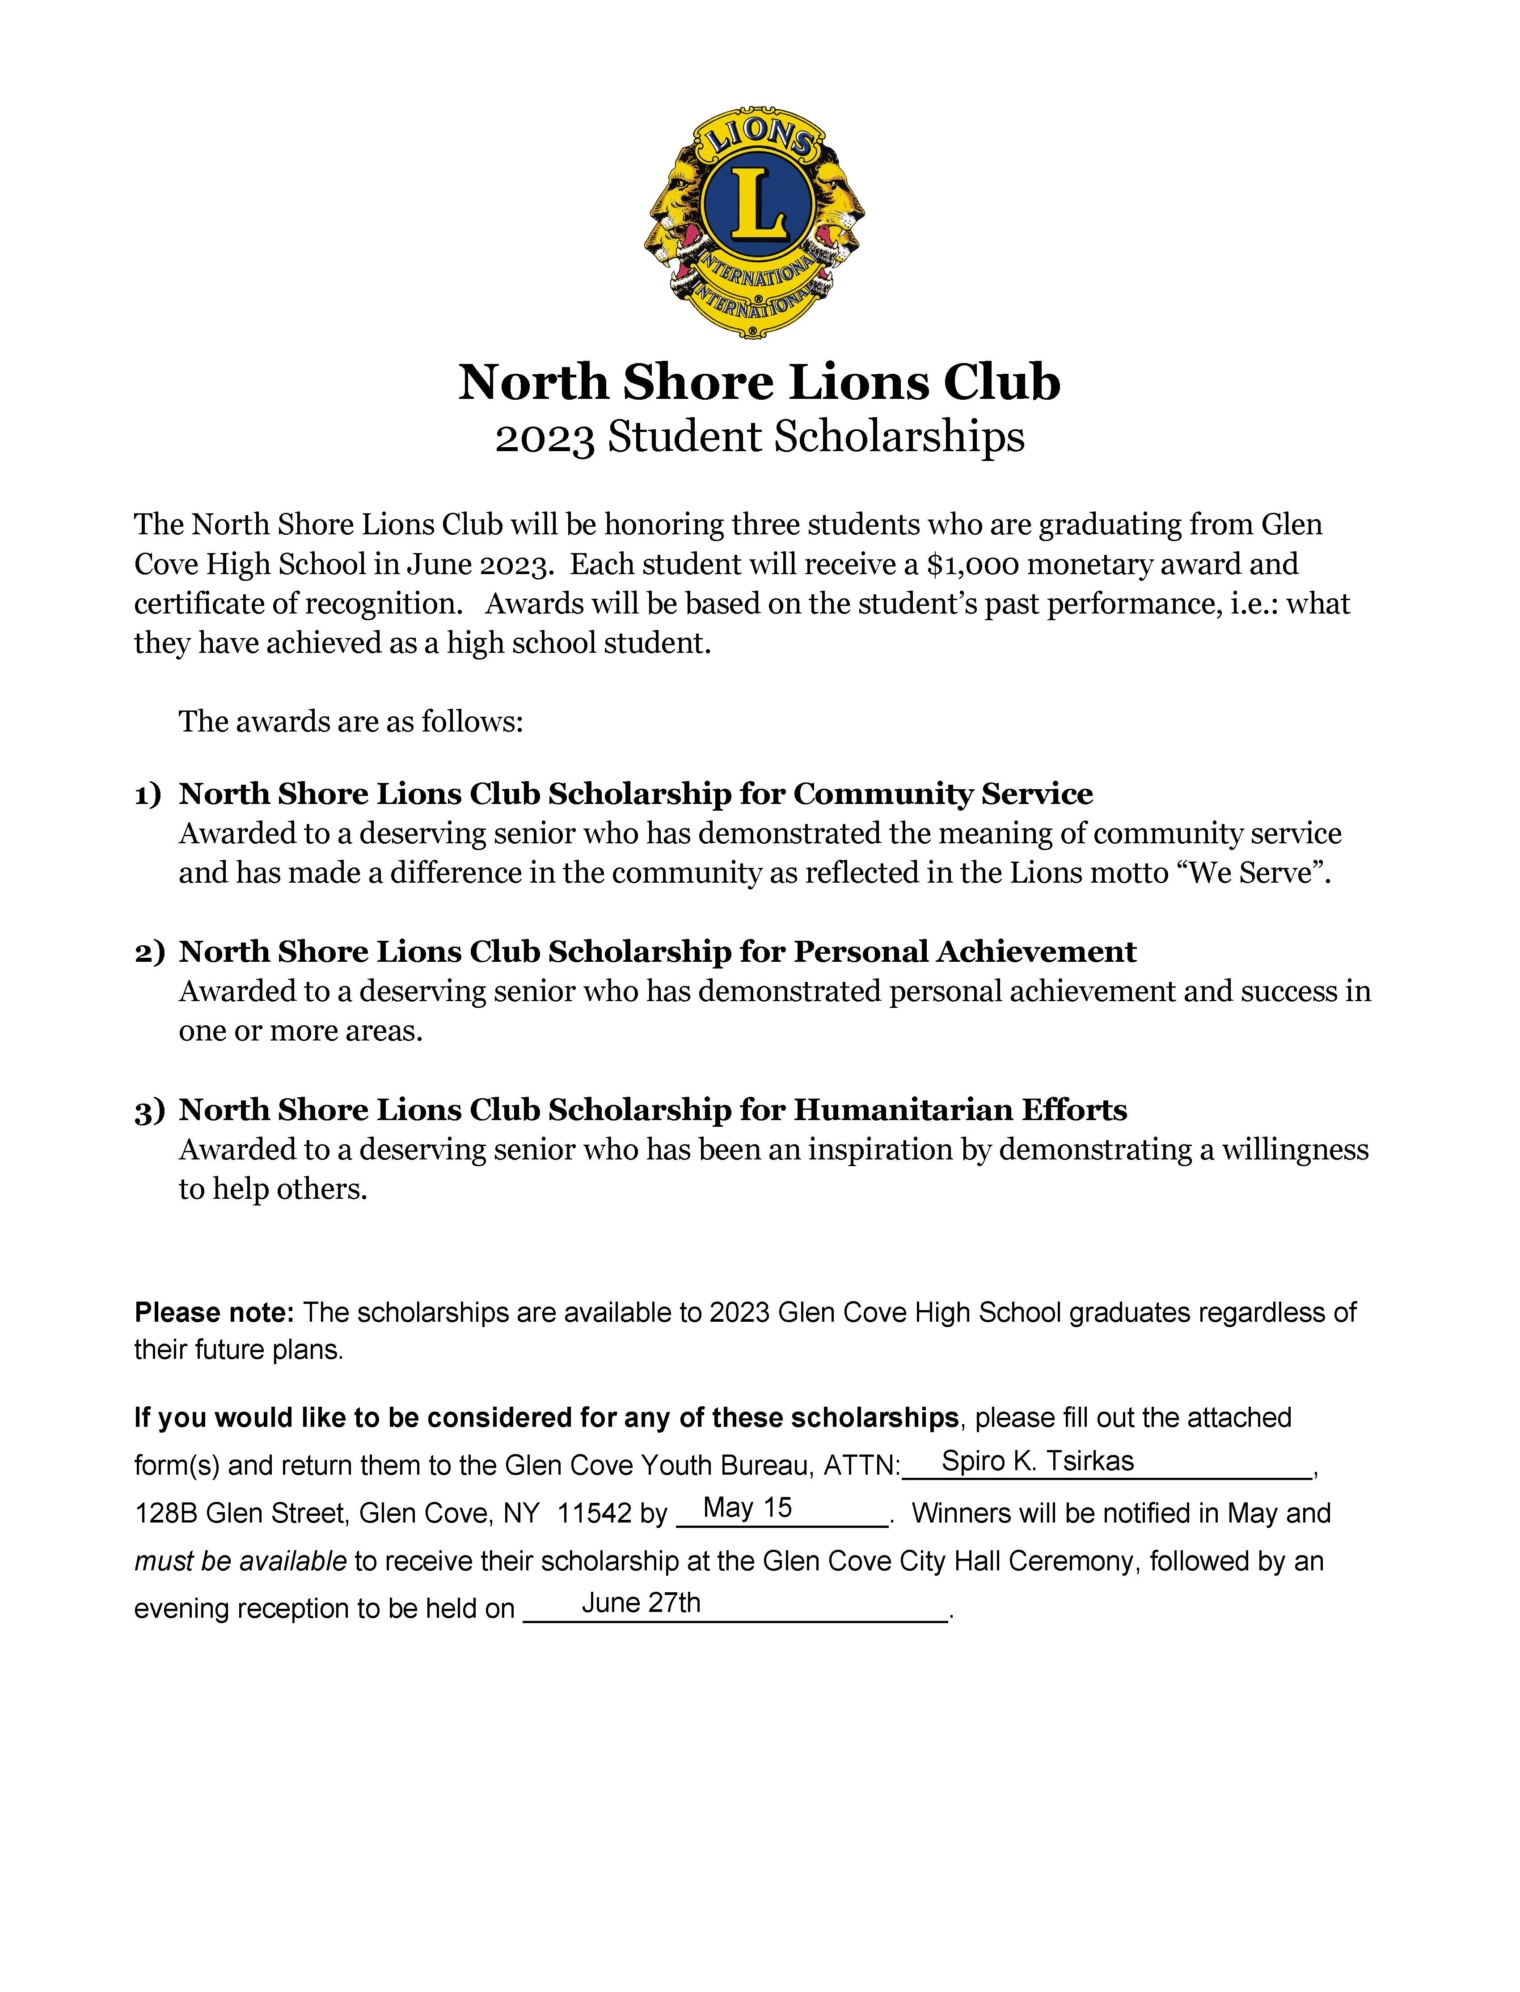 The North Shore Lions Club Student Scholarship Friends of the Glen